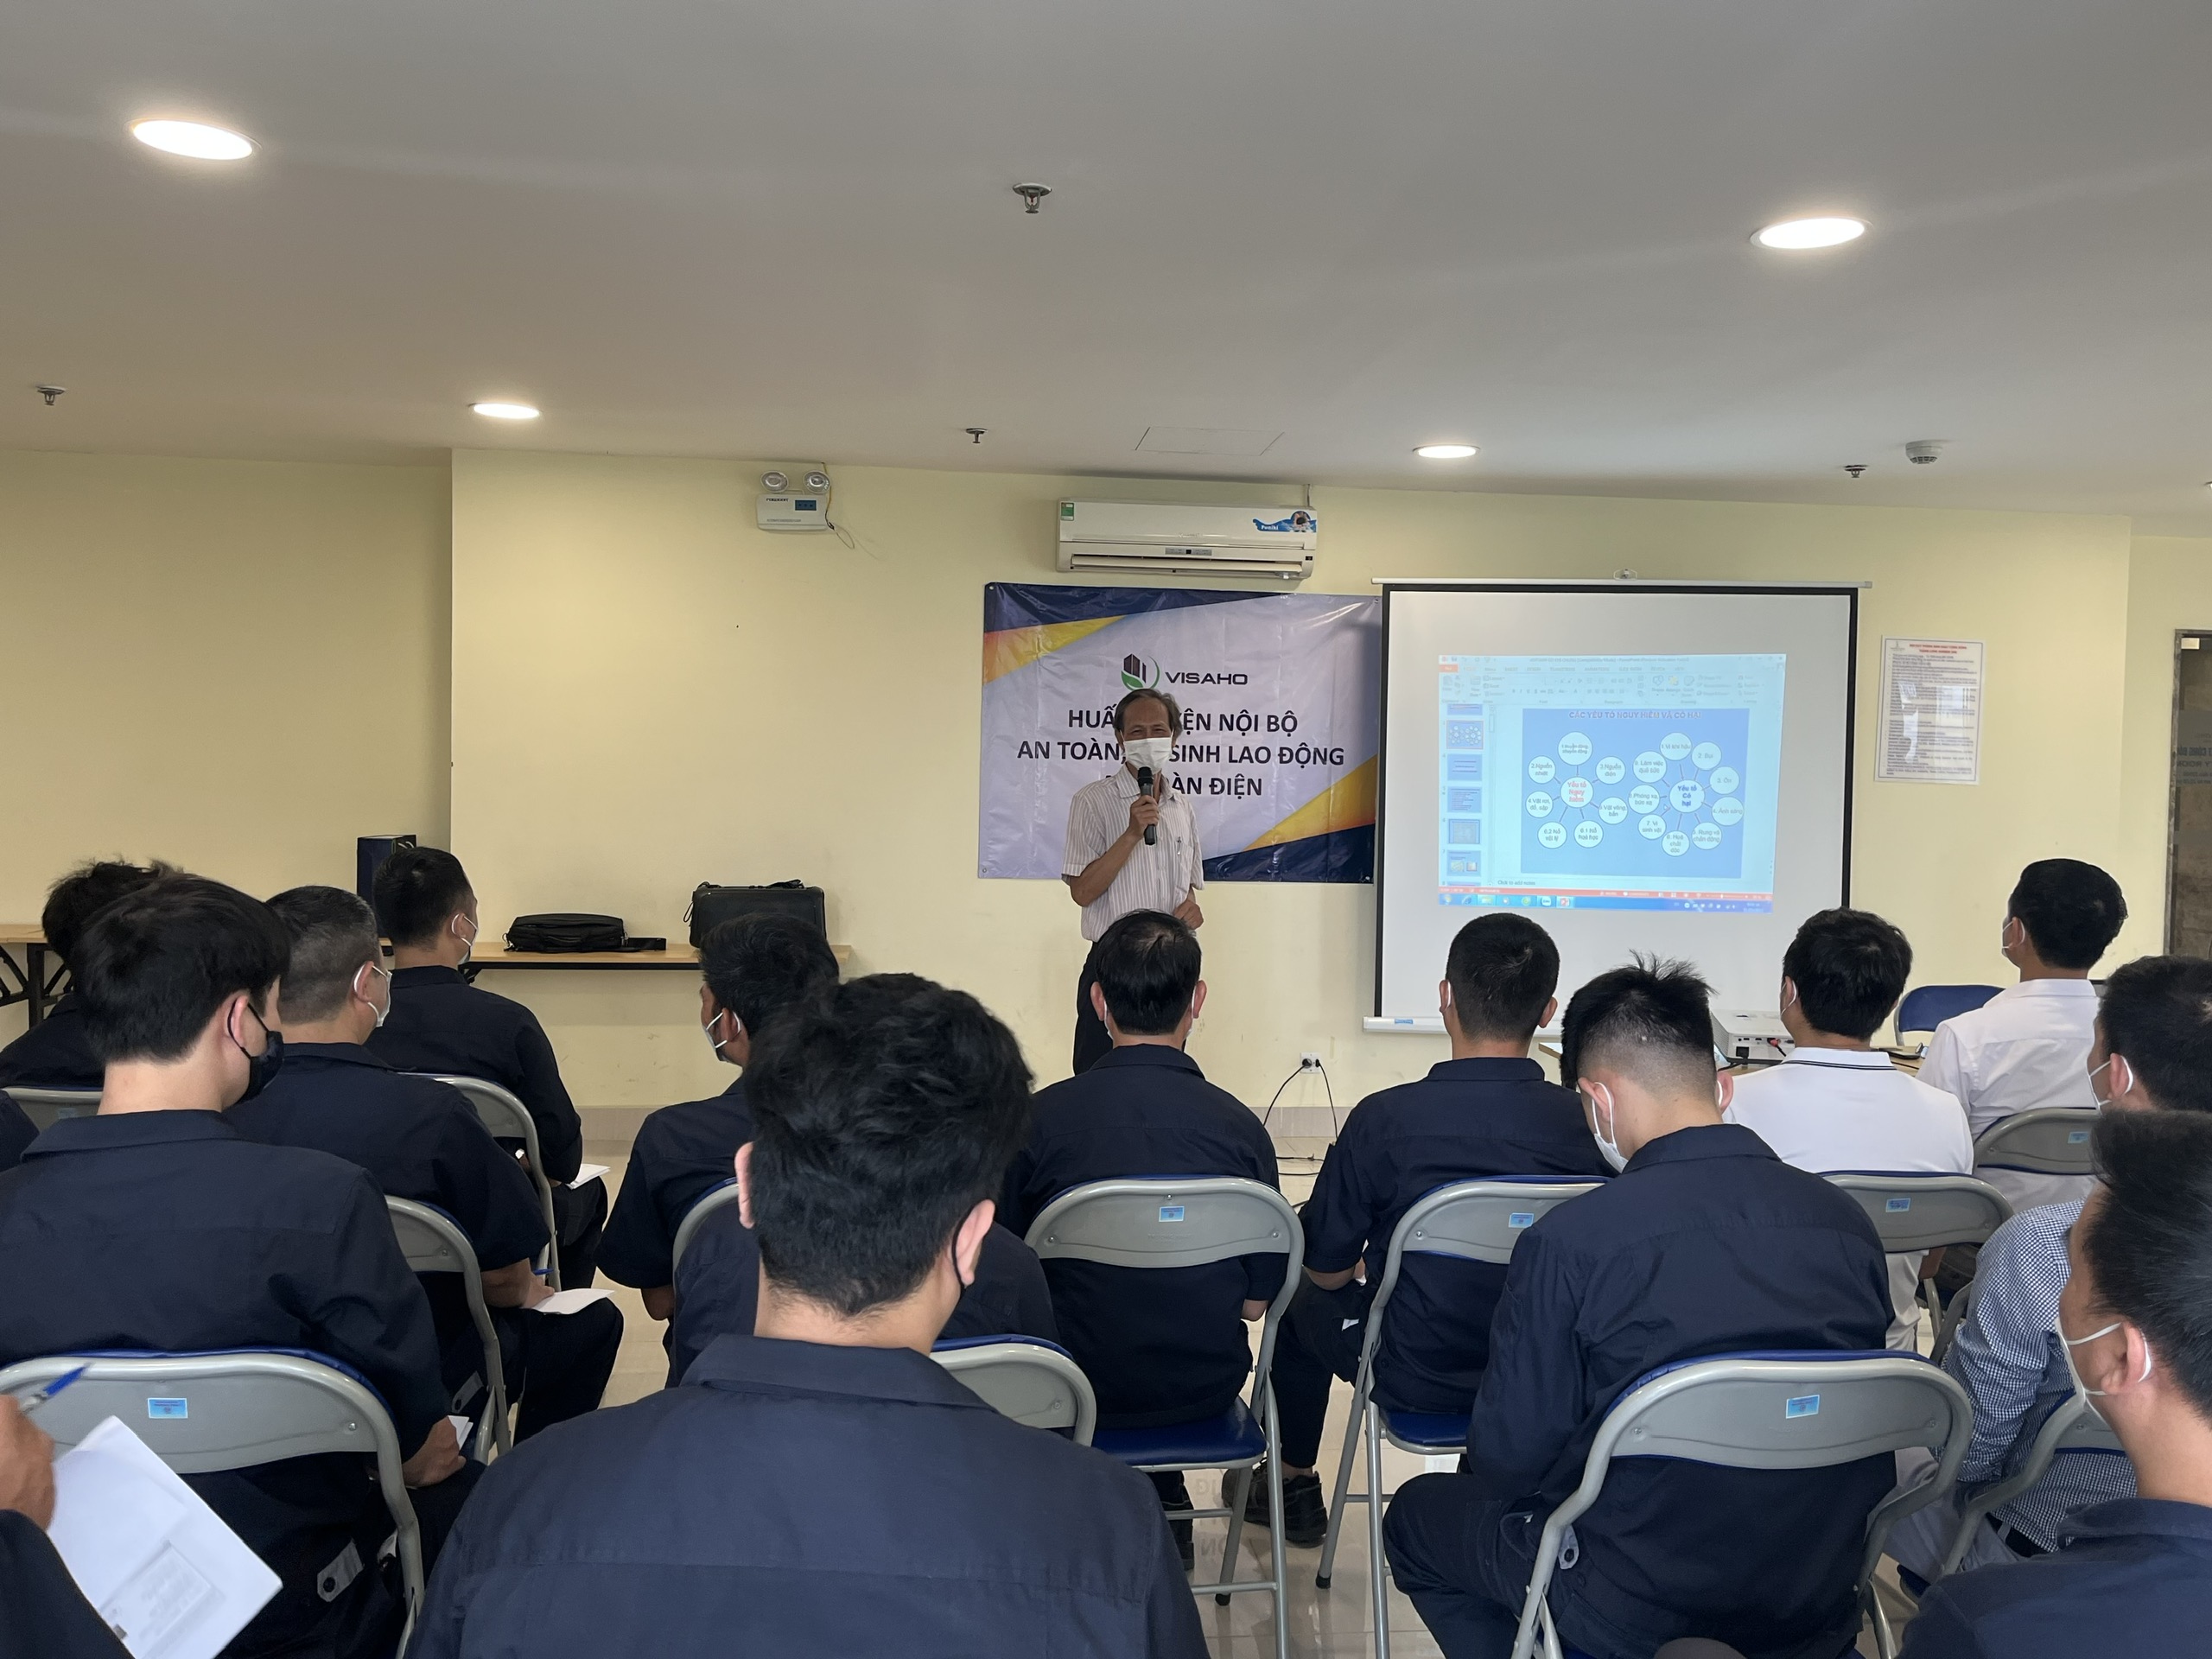 Training session on Occupational Safety and Health - Electrical Safety at Thang Long Number One